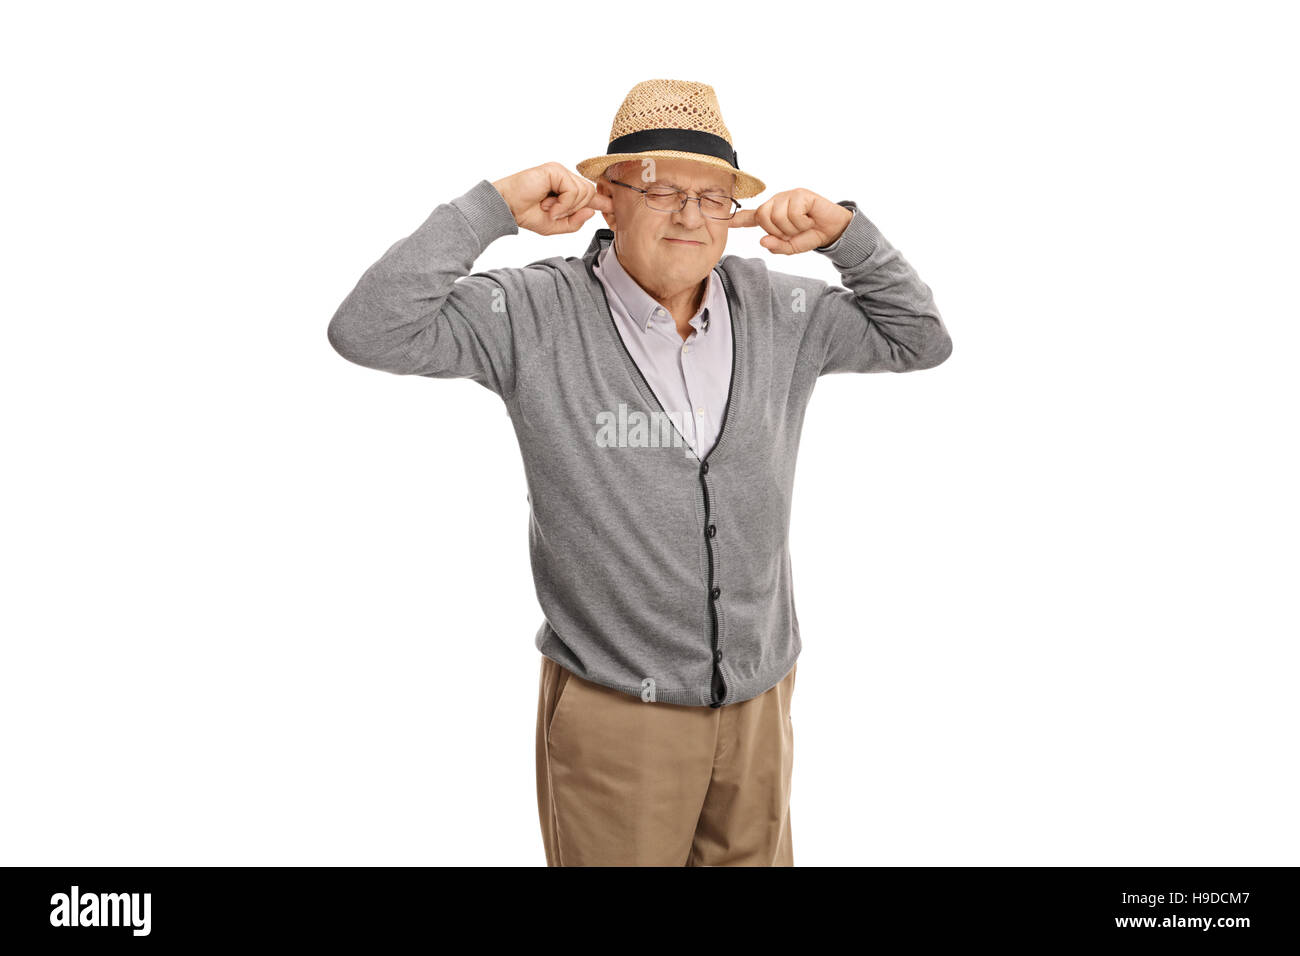 Mature man plugging his ears with his fingers isolated on white background Stock Photo